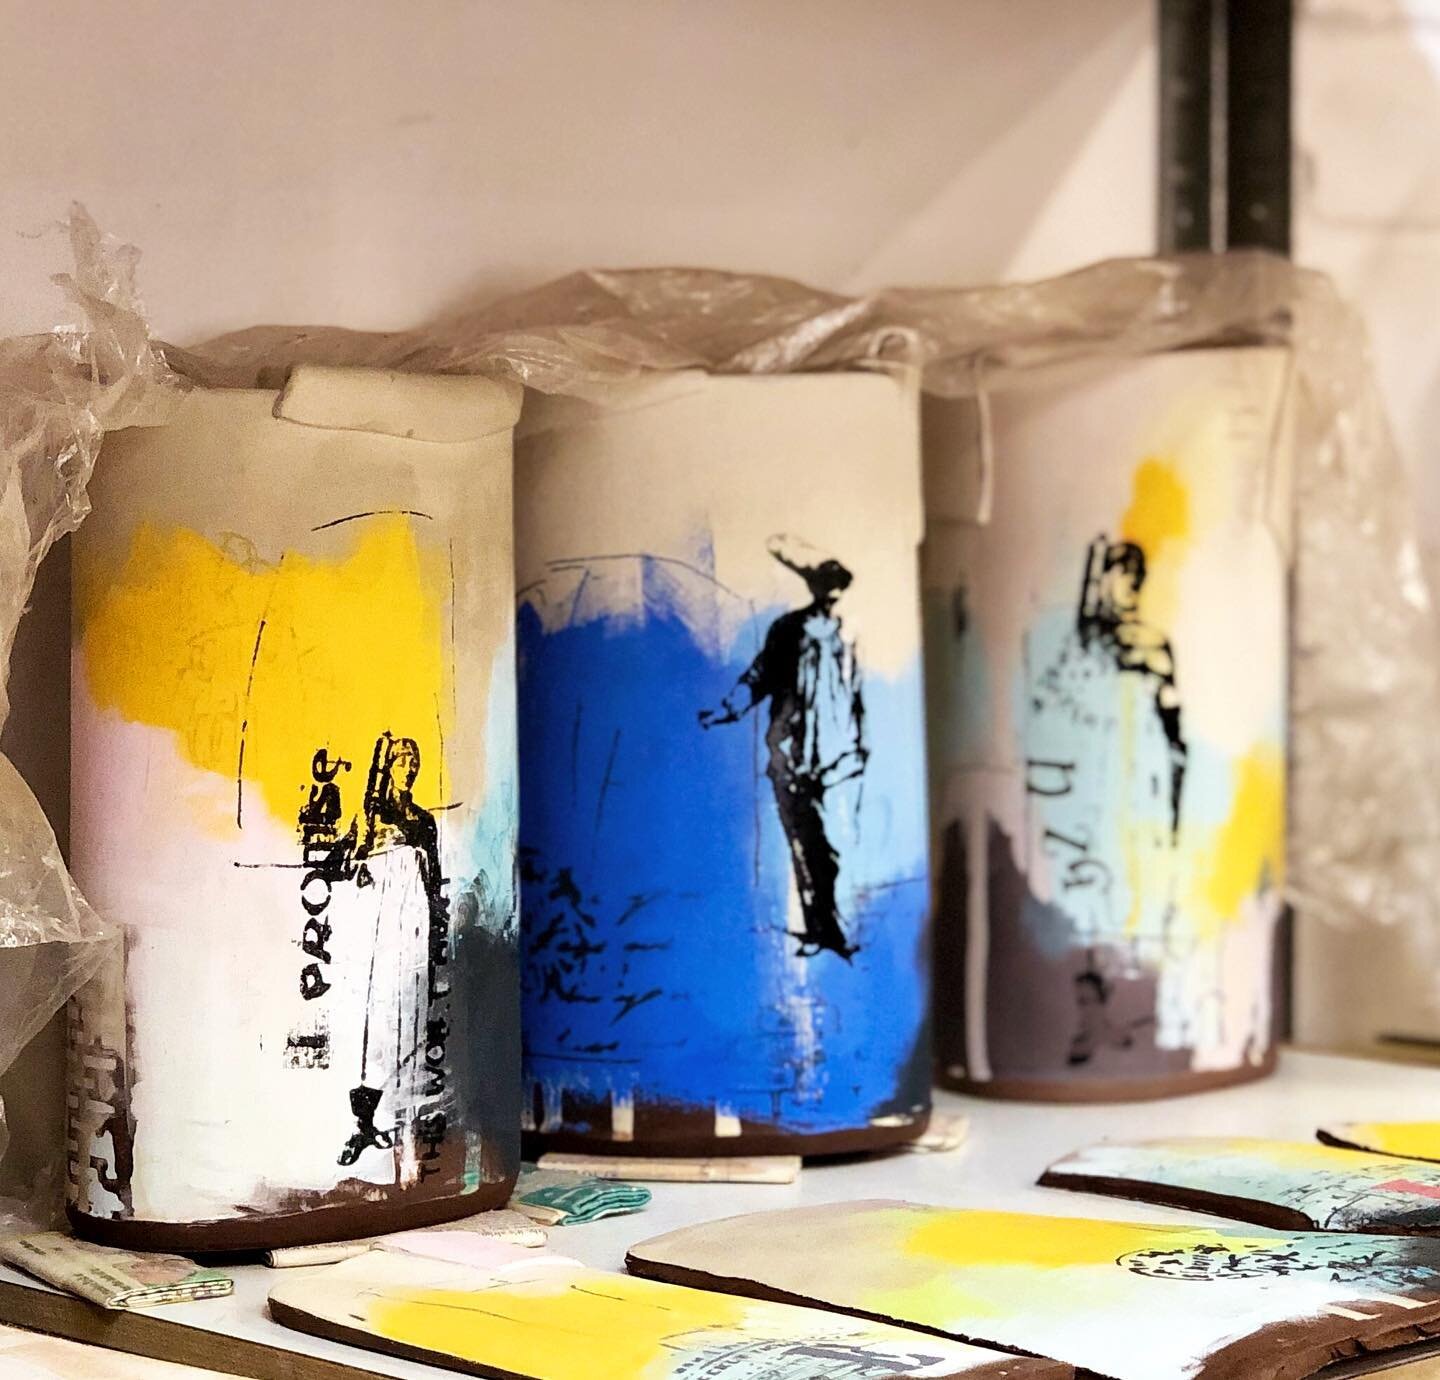 The printing process is finished on these pieces.  I love  the vessels at this drying stage the clay looks alive and vibrant. Having so much fun working with a collage approach. #clay #slabbuilt #earthenware #painterly #abstact #collage #colour #colo